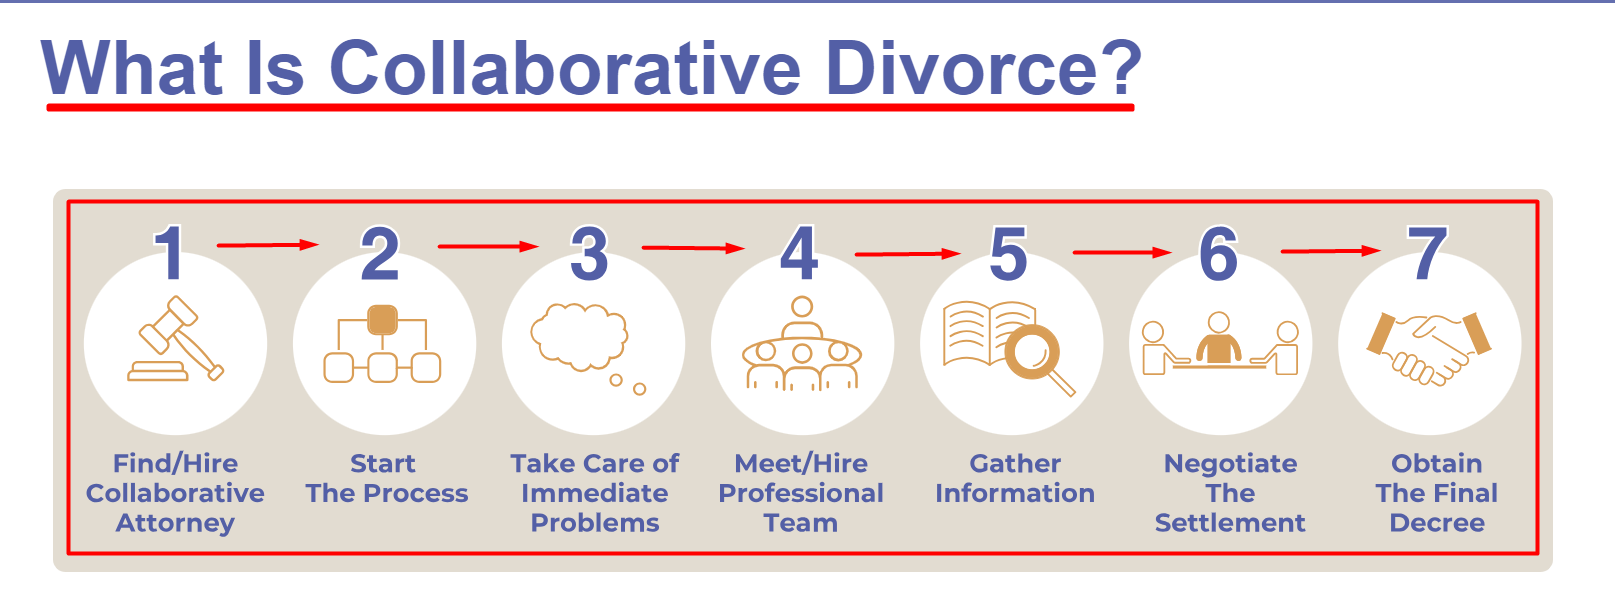 Flowchart titled "What Is Collaborative Divorce?" outlining seven steps: hire attorney, start process, address problems, hire team, gather info, negotiate settlement, obtain decree.